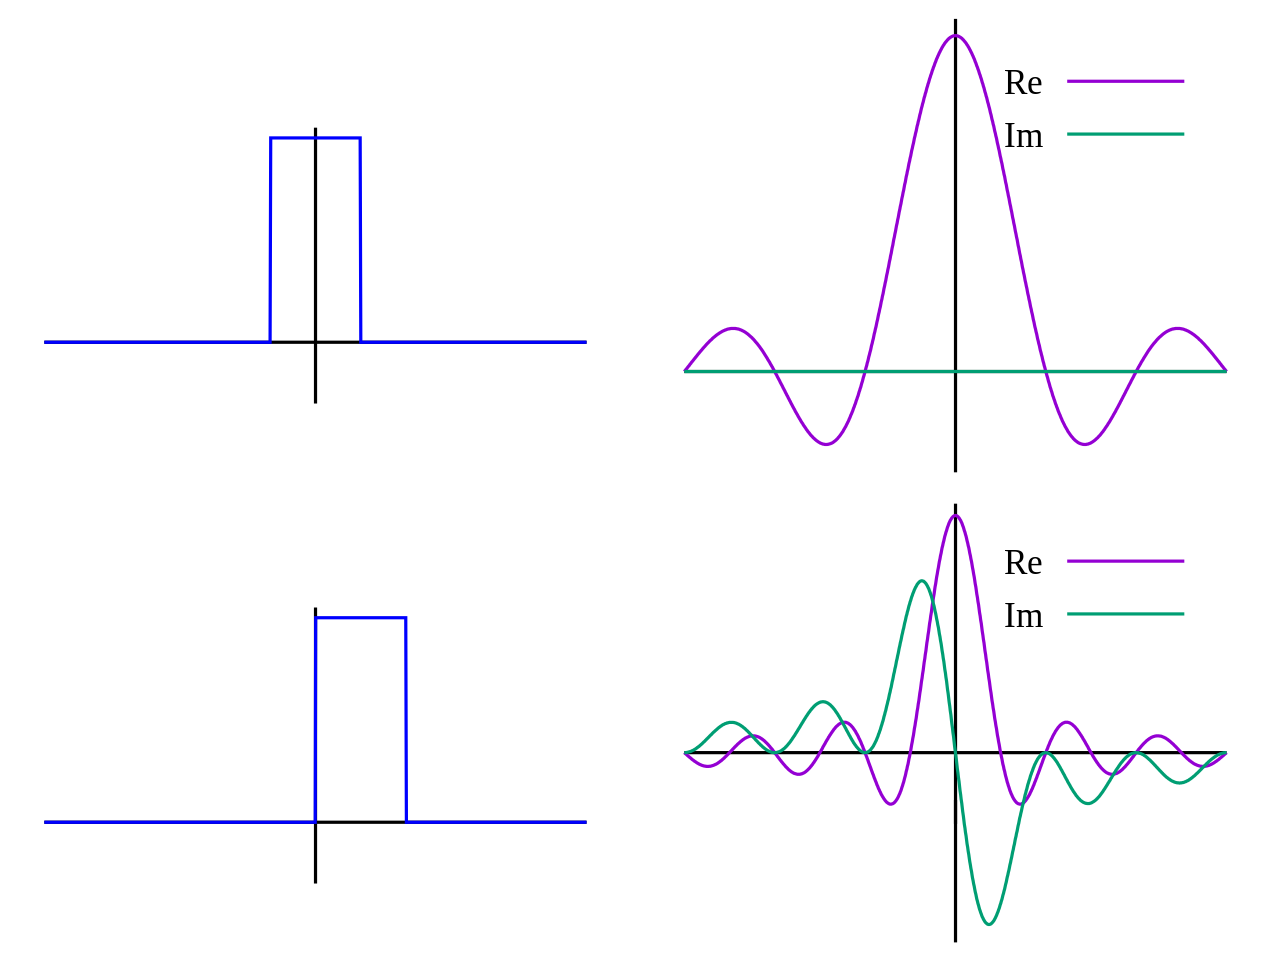 Rectangular functions and their respective fourier transforms.